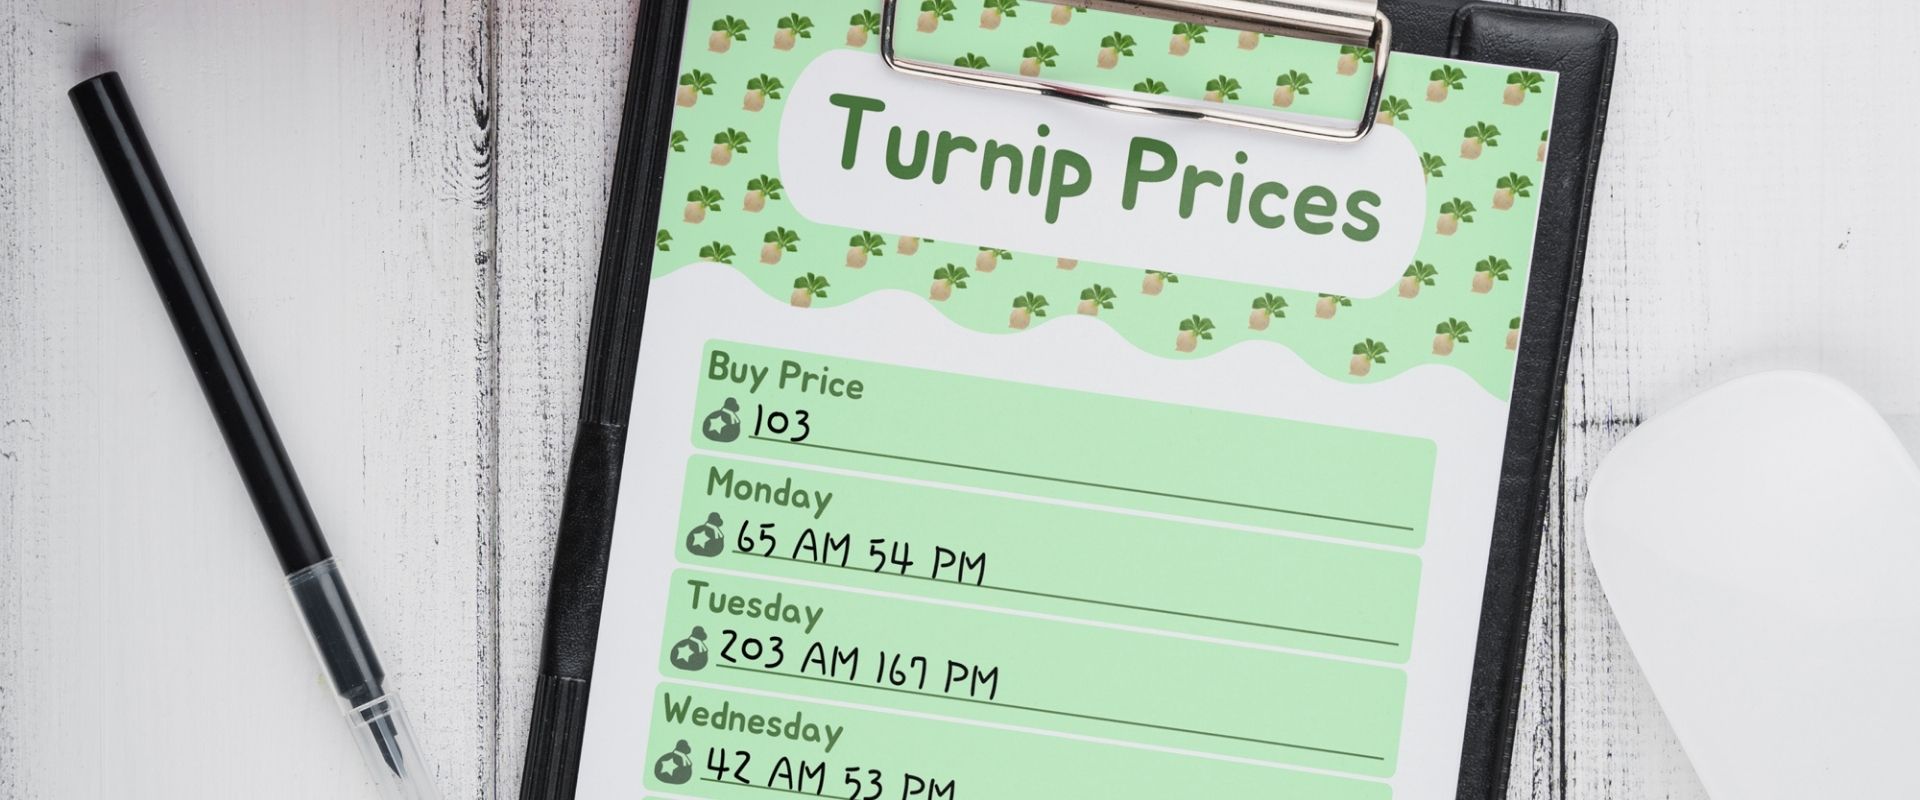 Turnip Price Log Planner Page Download for Animal Crossing New Horizons